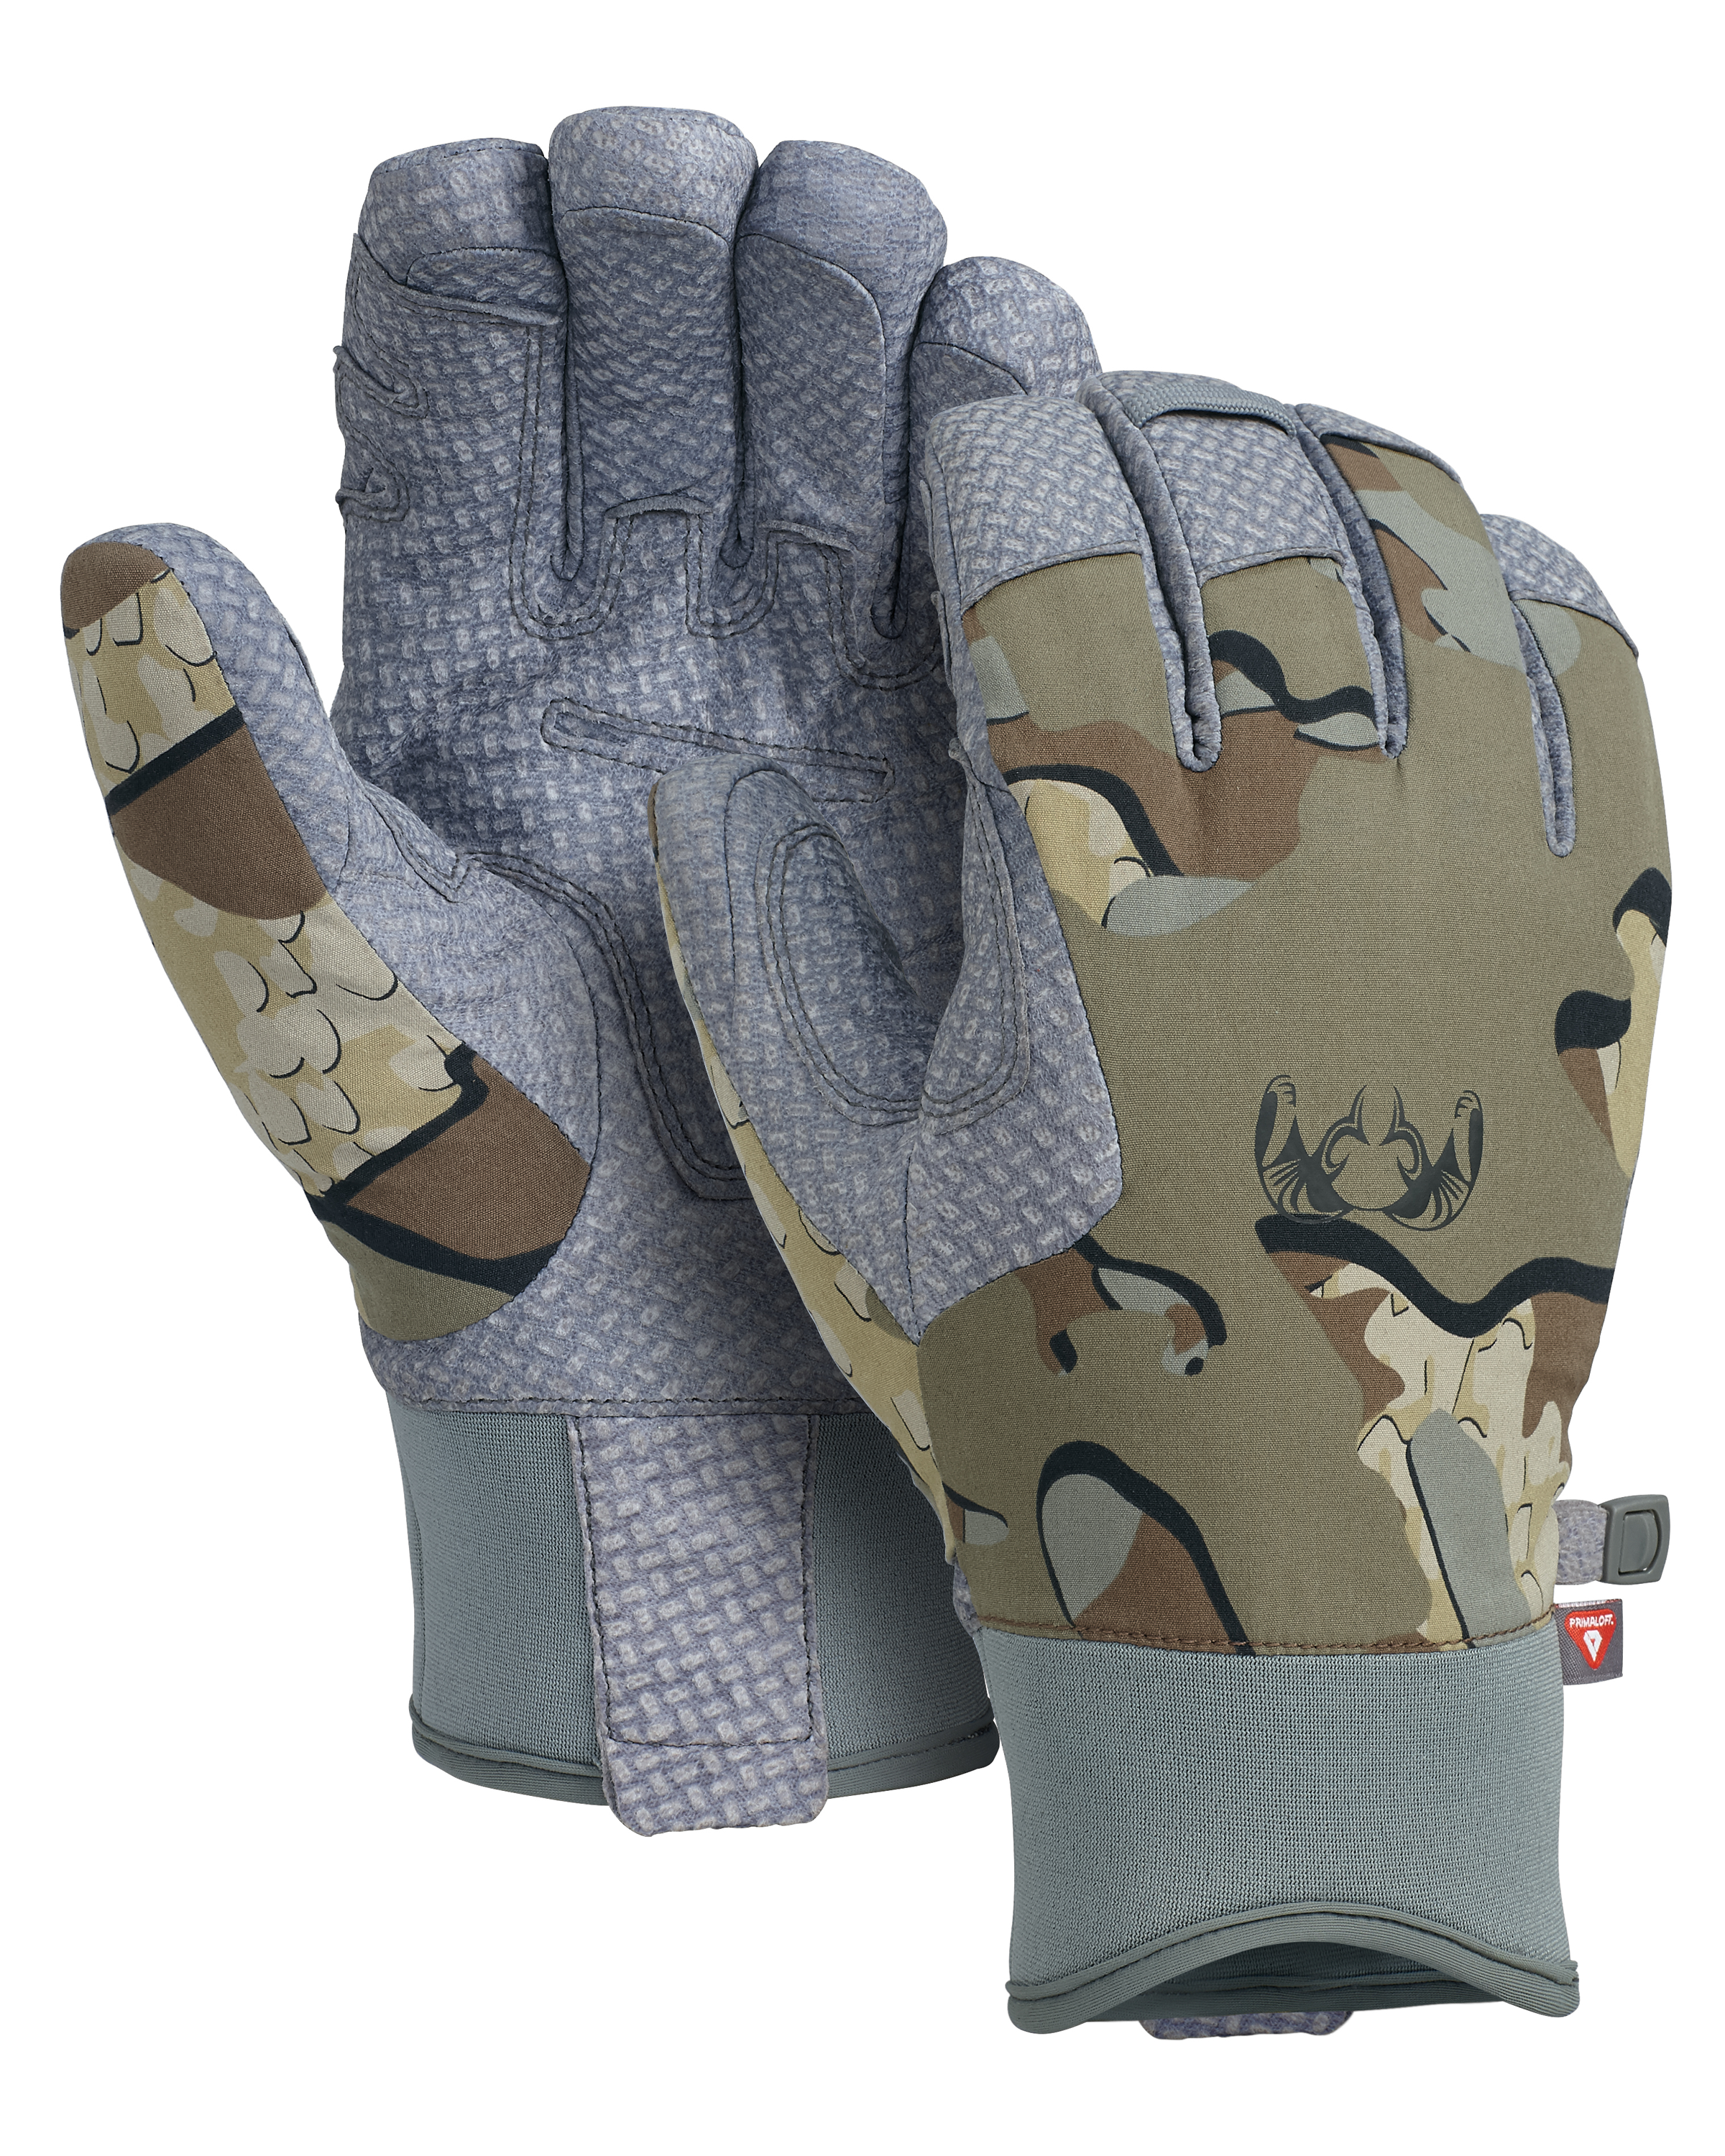 KUIU Expedition Hunting Glove in Valo | Size 2XL